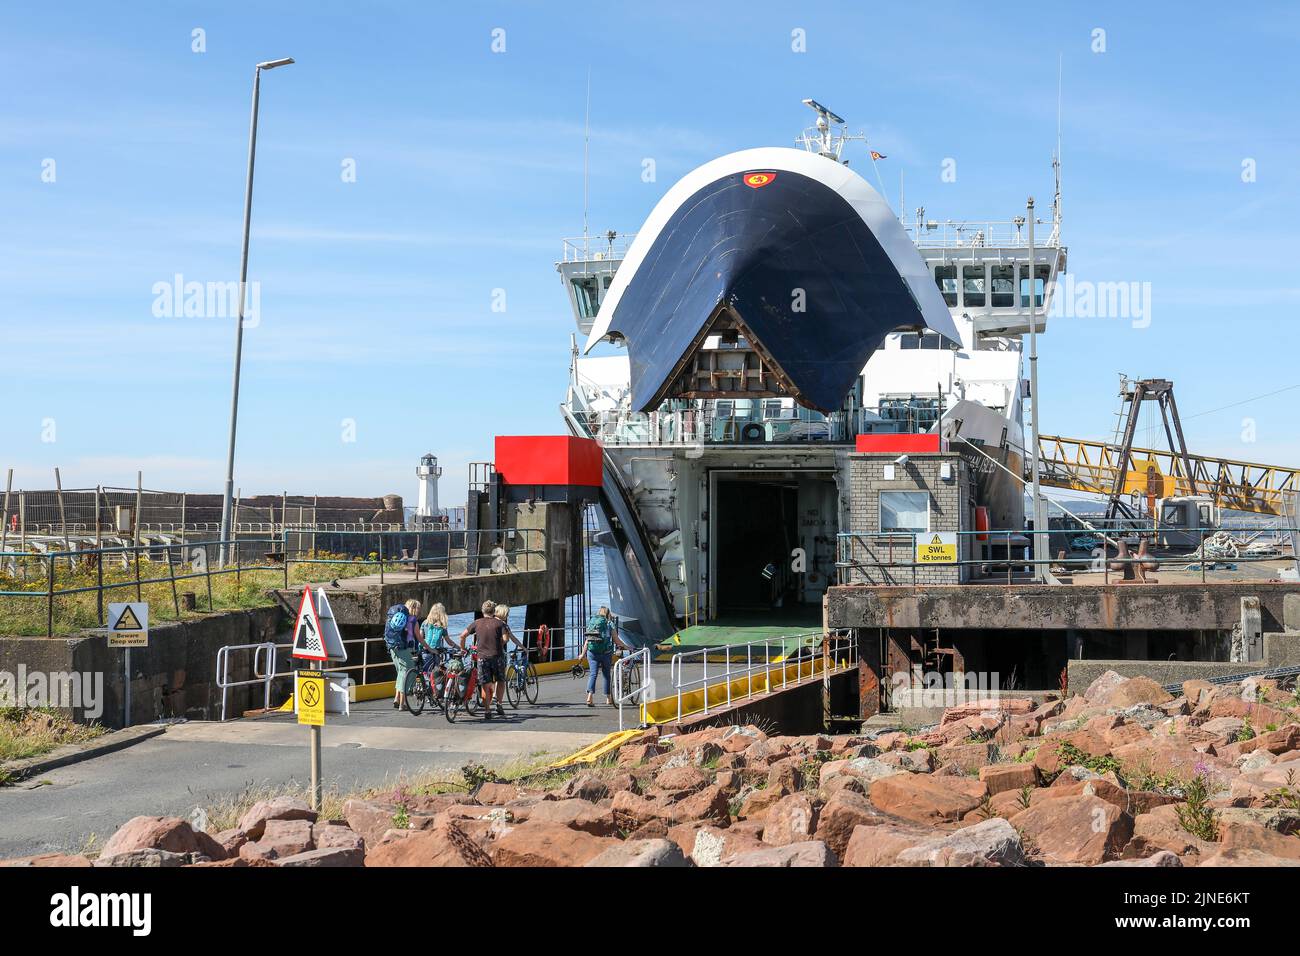 Caledonian MacBrayne ferry, Caledonian Isles, sailing from Isle of Arran, across the Firth of Clyde, berthed at Ardrossan and cyclists boarding via th Stock Photo